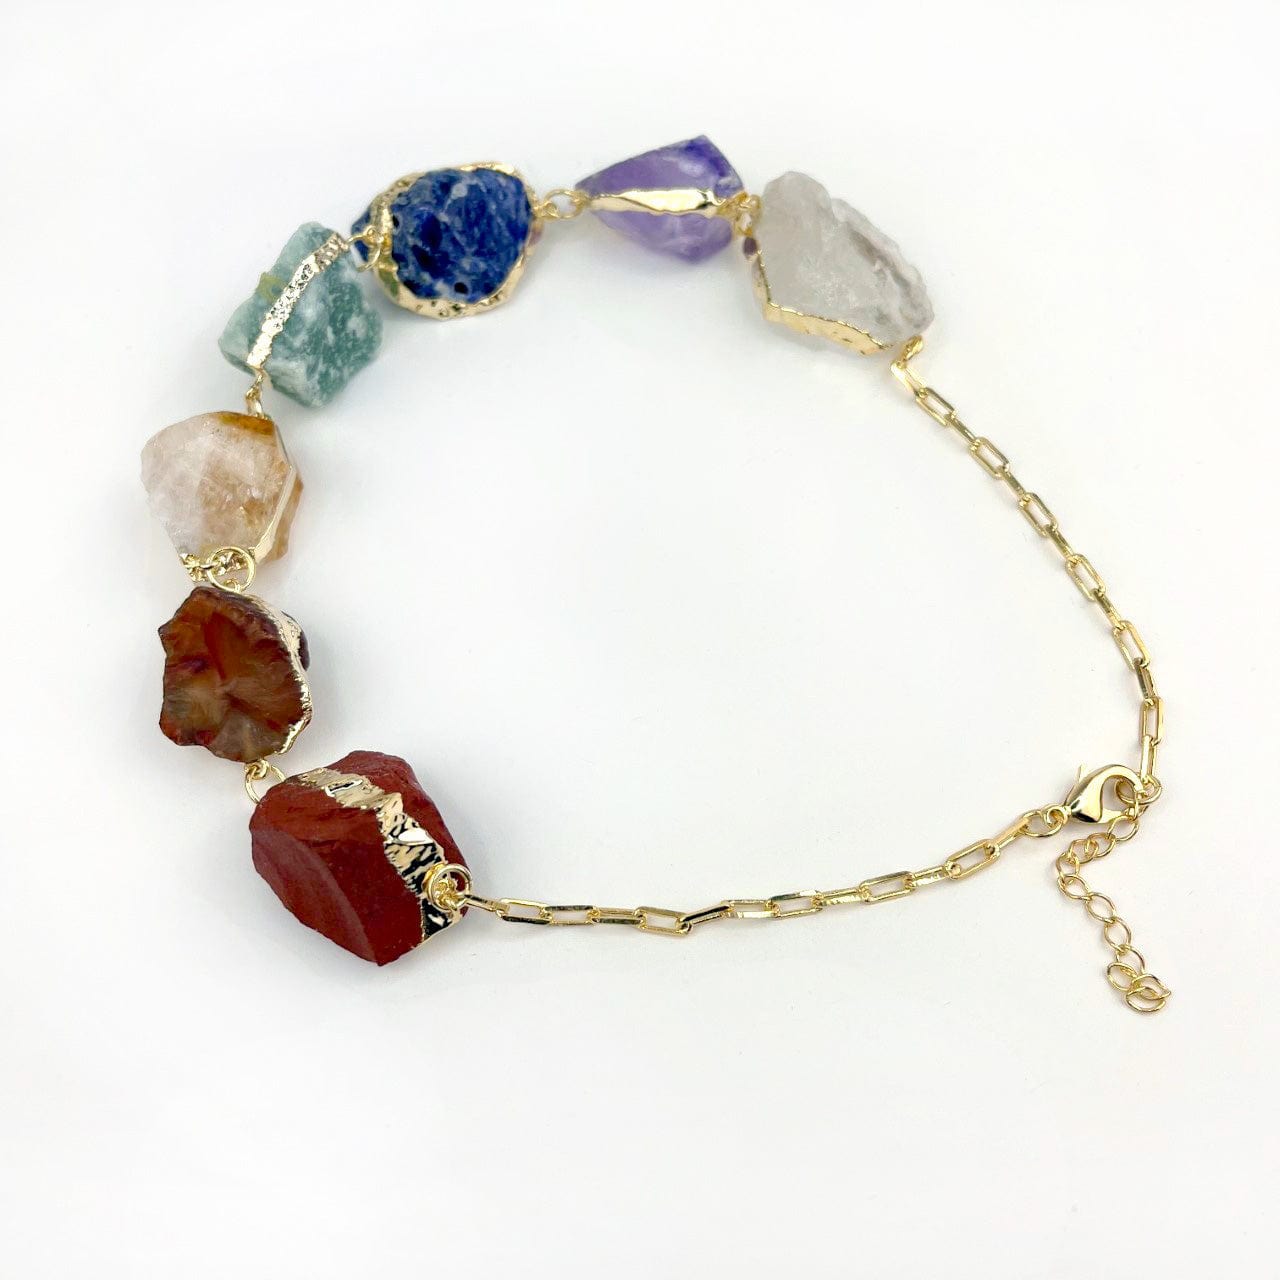 Chakra Necklace - 7 Rough Stones on large Link Chain in gold